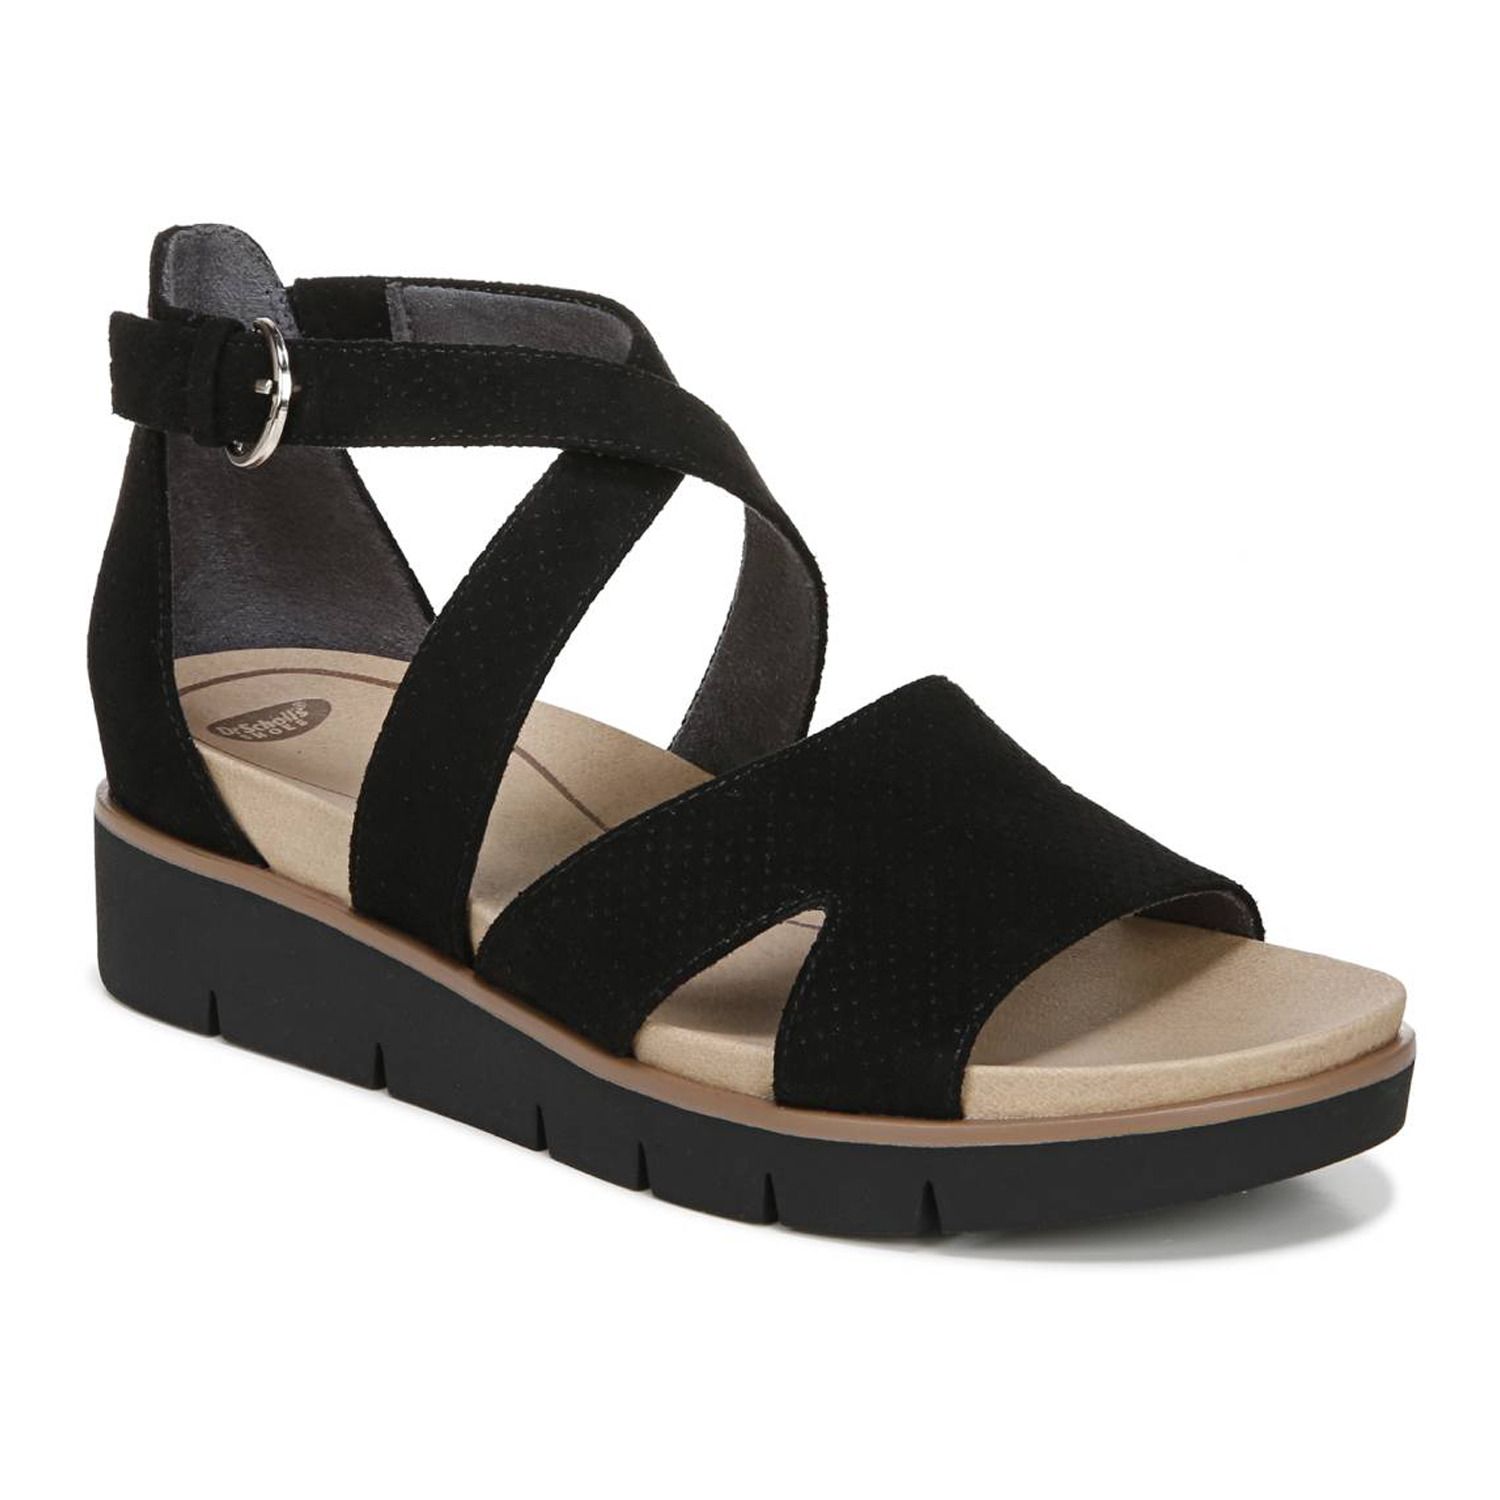 Image for Dr. Scholl's Good Karma Women's Strappy Sandals at Kohl's.